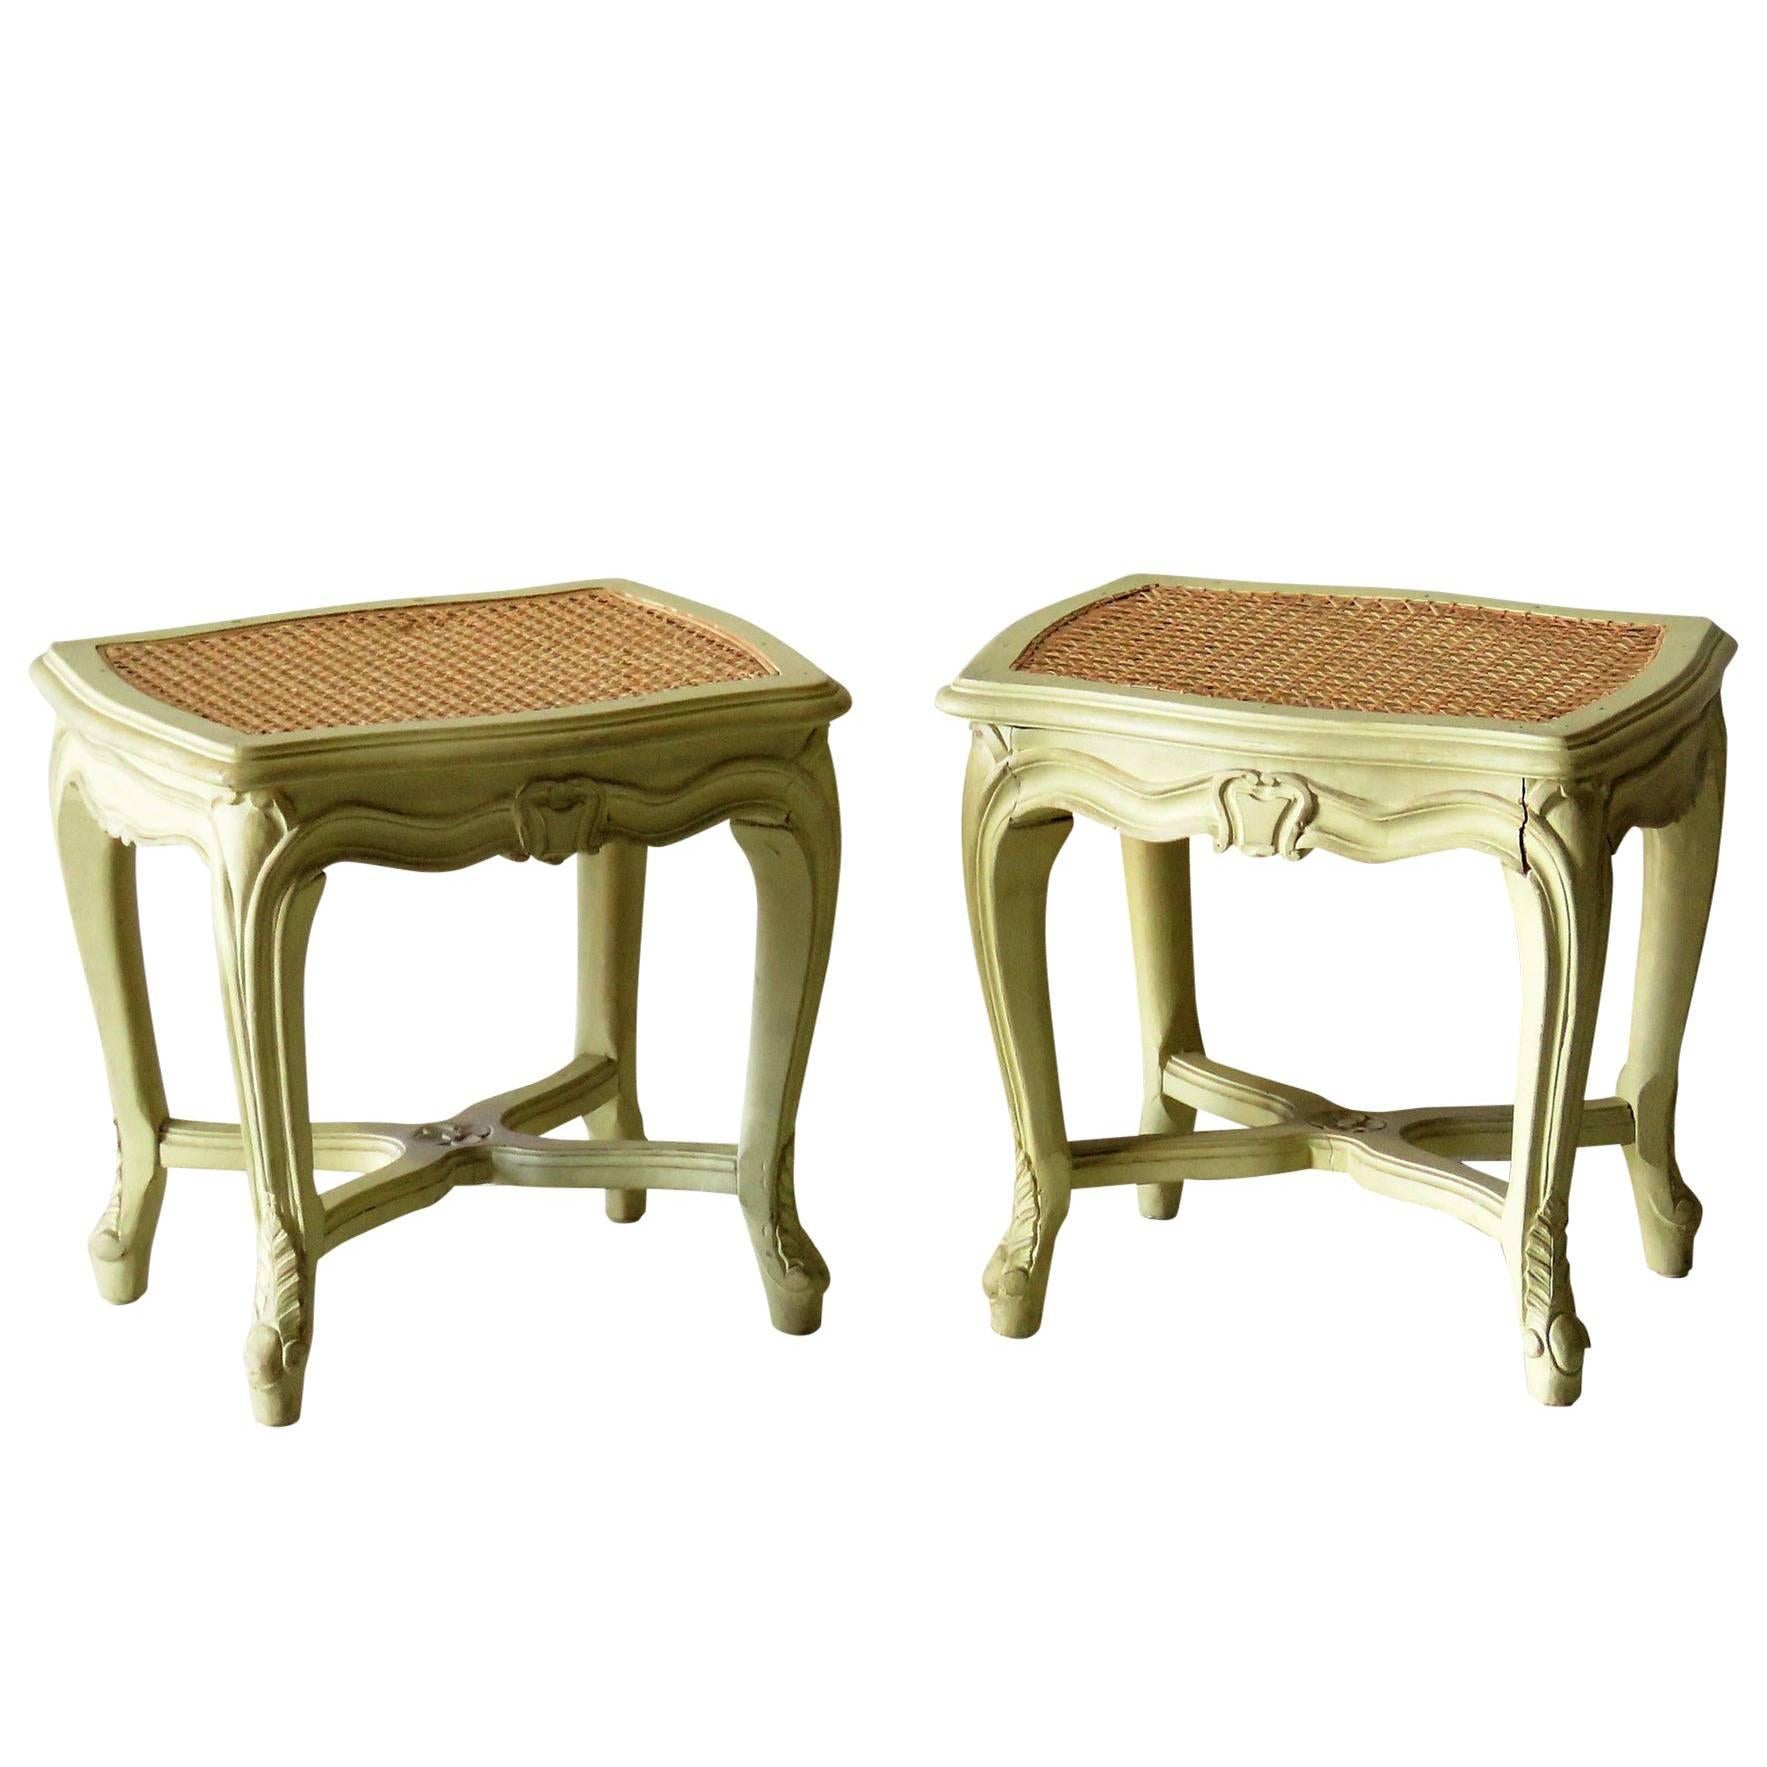 Pair of Louis XVI Style Swedish Style Distressed Painted Caned Stools